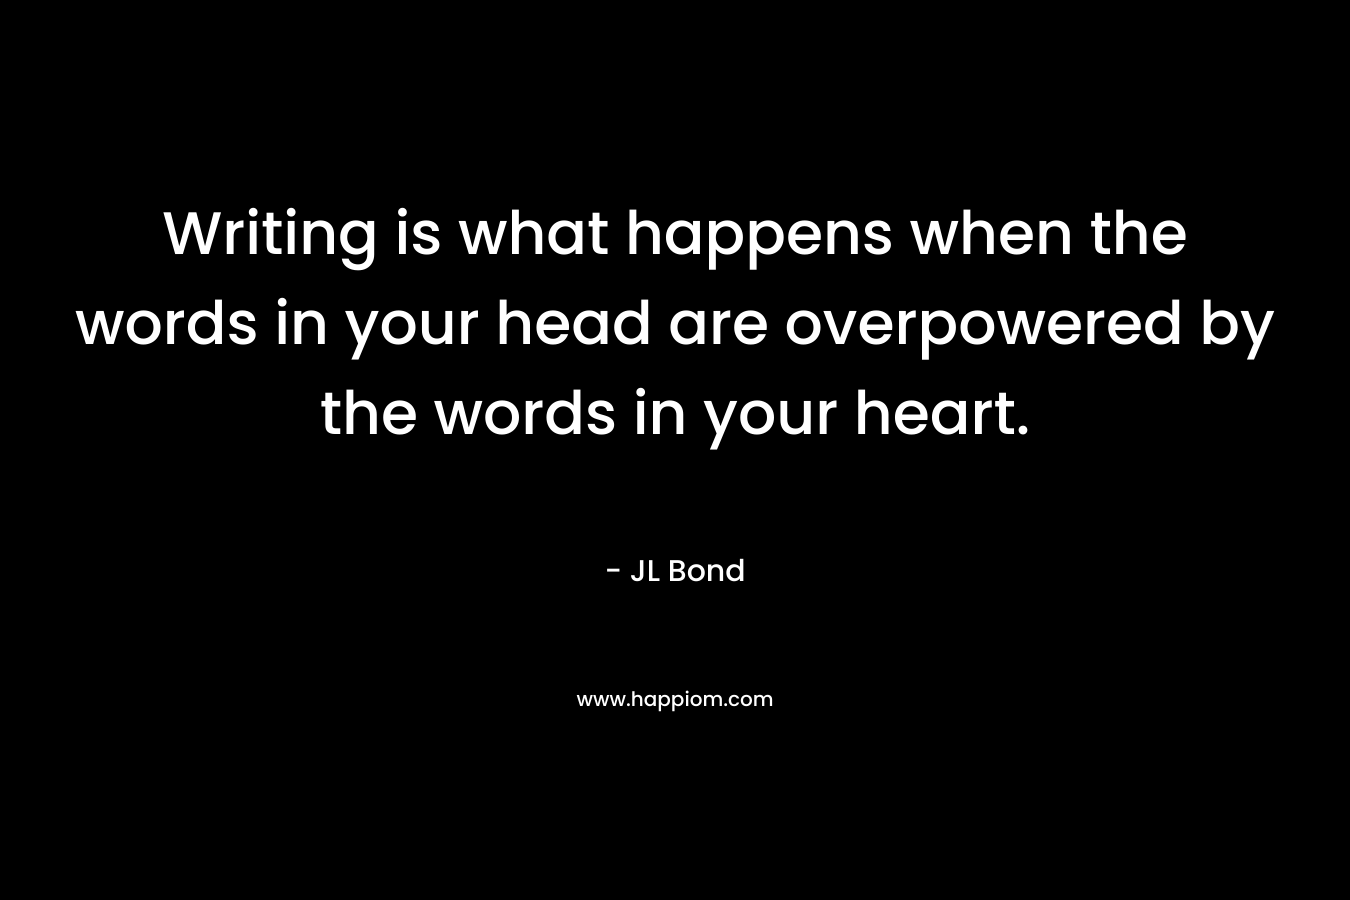 Writing is what happens when the words in your head are overpowered by the words in your heart. – JL Bond